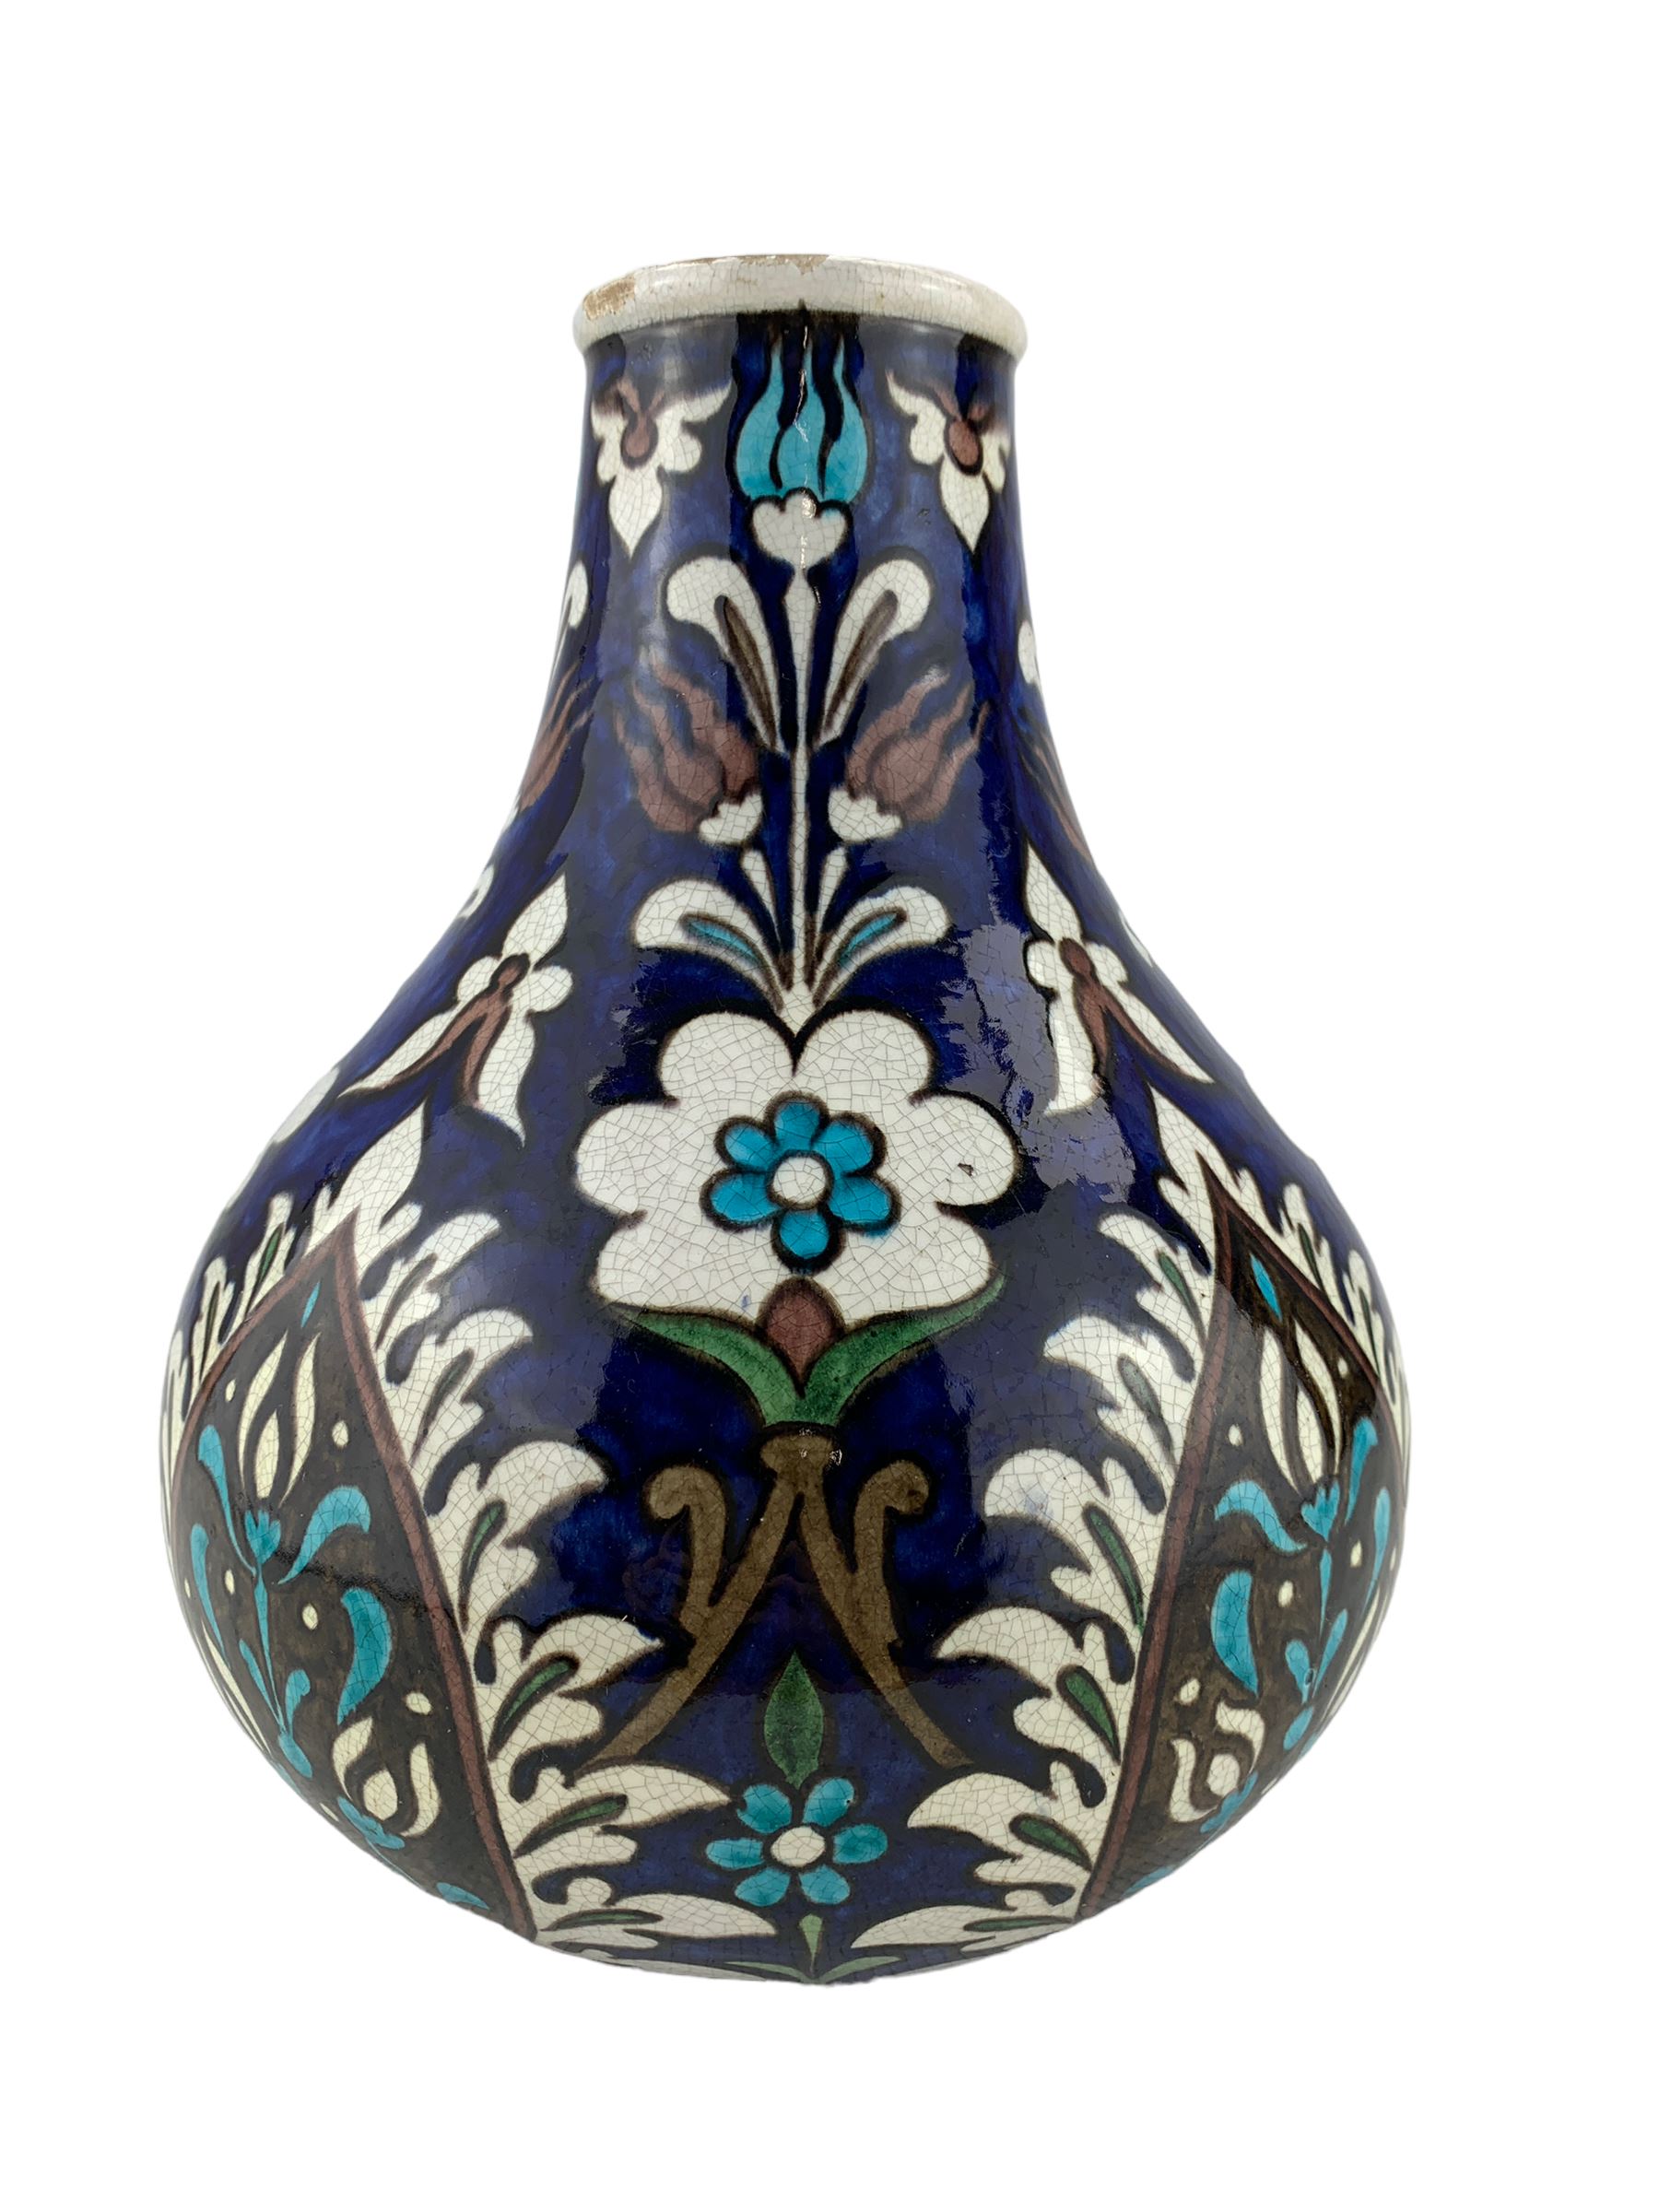 Burmantofts Faience Anglo-Persian bottle vase - Image 5 of 7